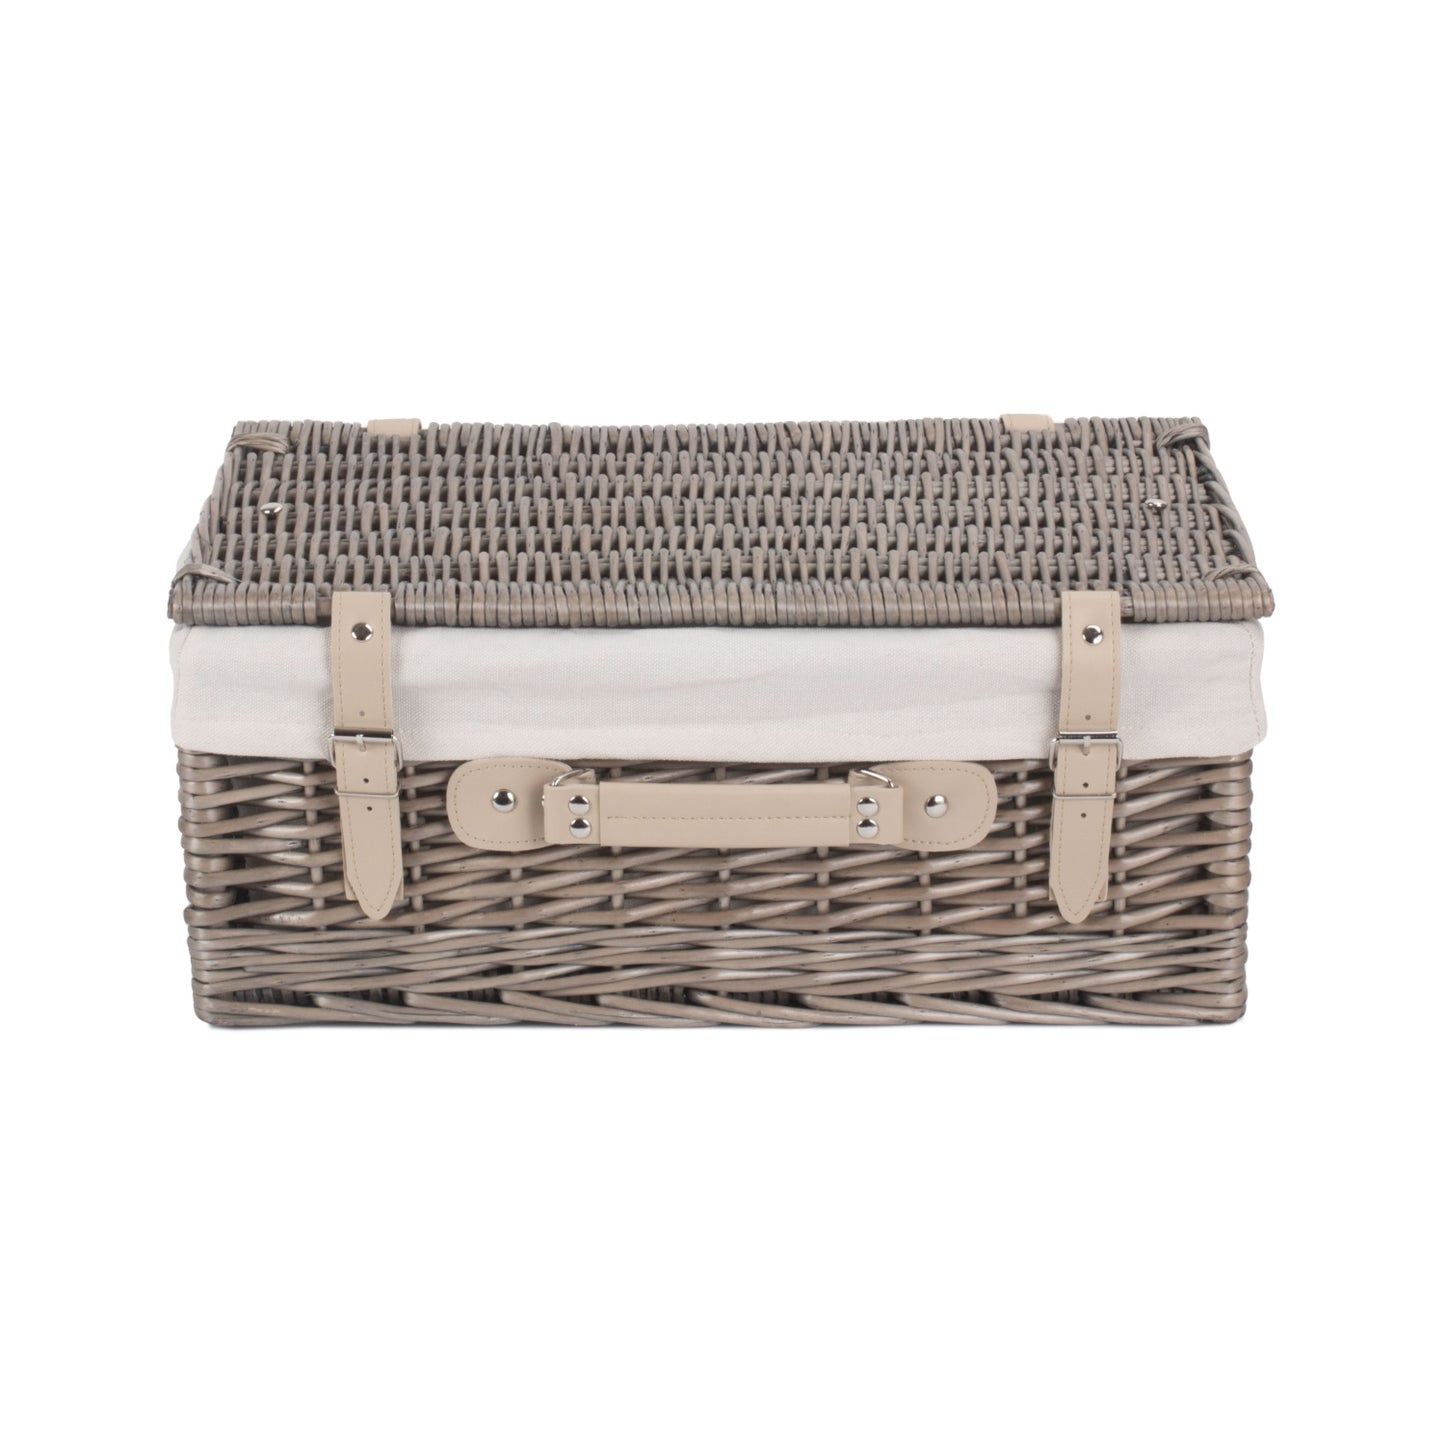 18 Inch Antique Wash Hamper With White Lining